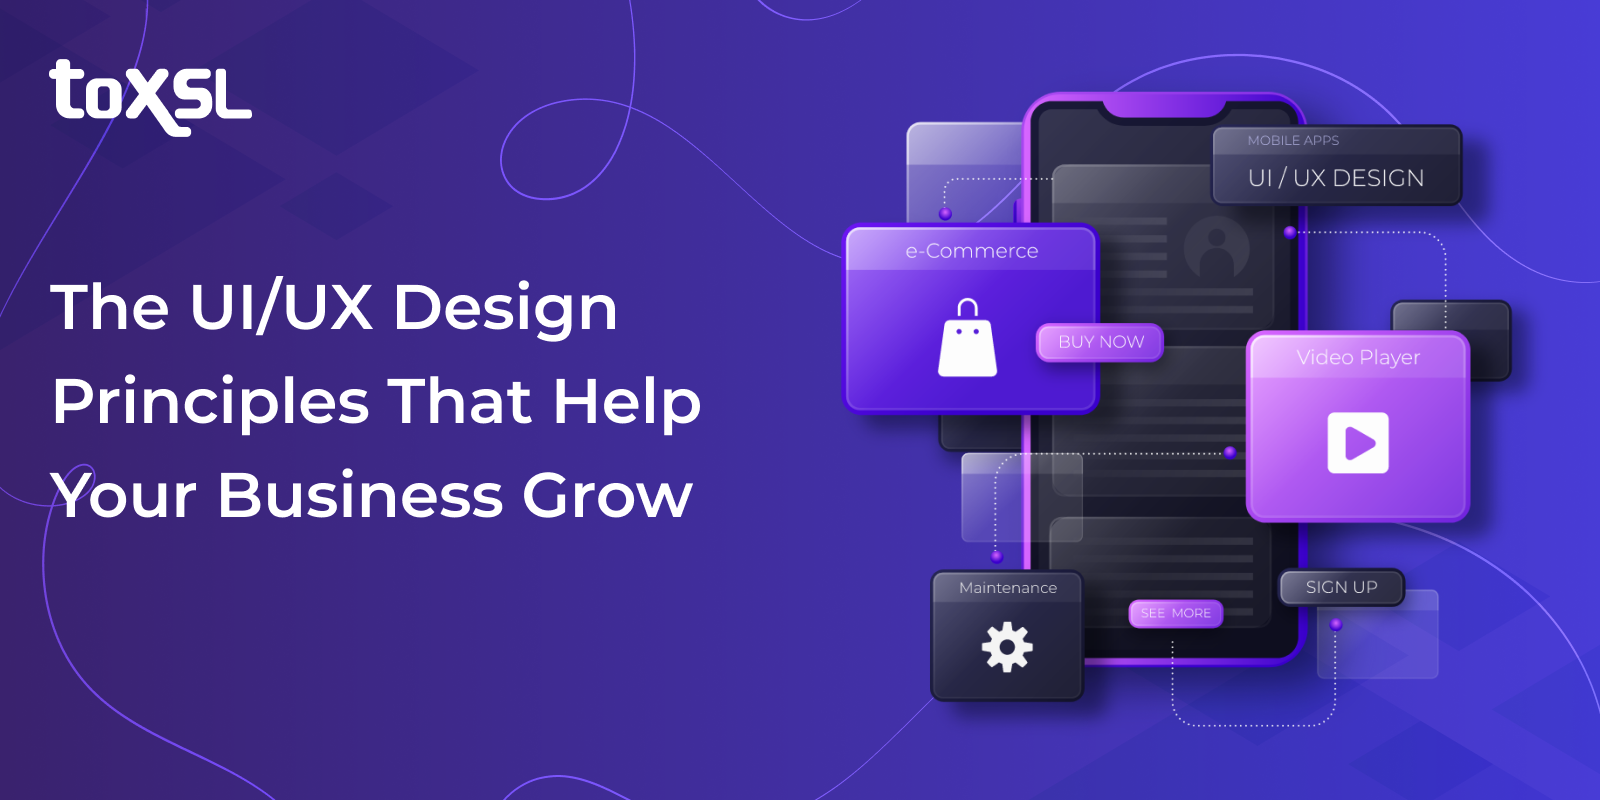 The UI/UX Design Principles That Help Your Business Grow